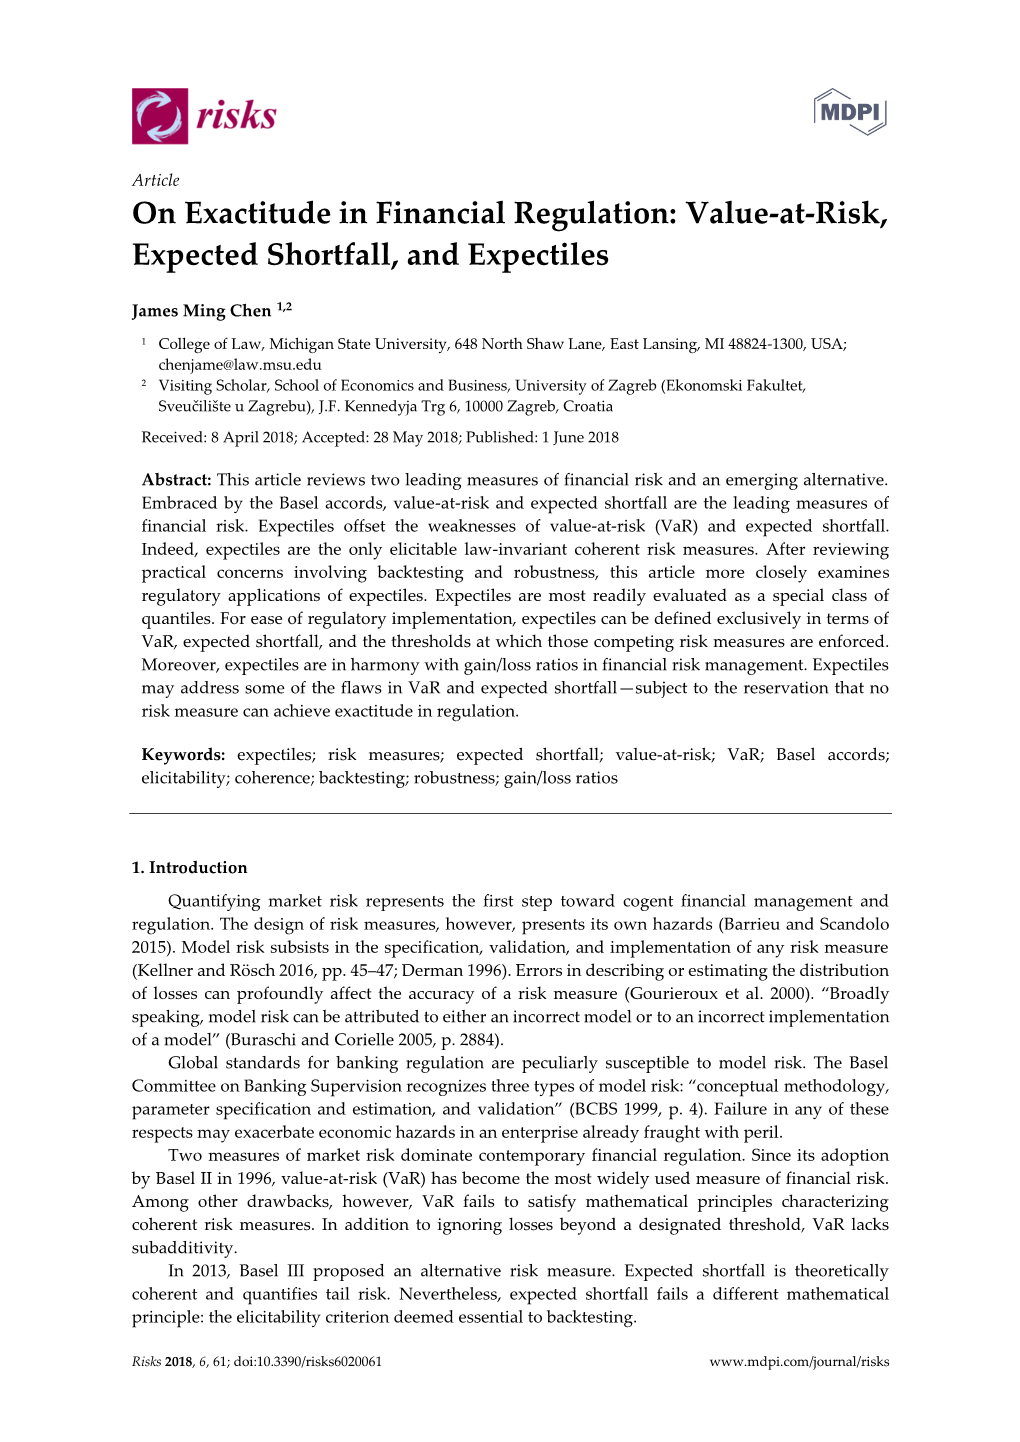 Value-At-Risk, Expected Shortfall, and Expectiles